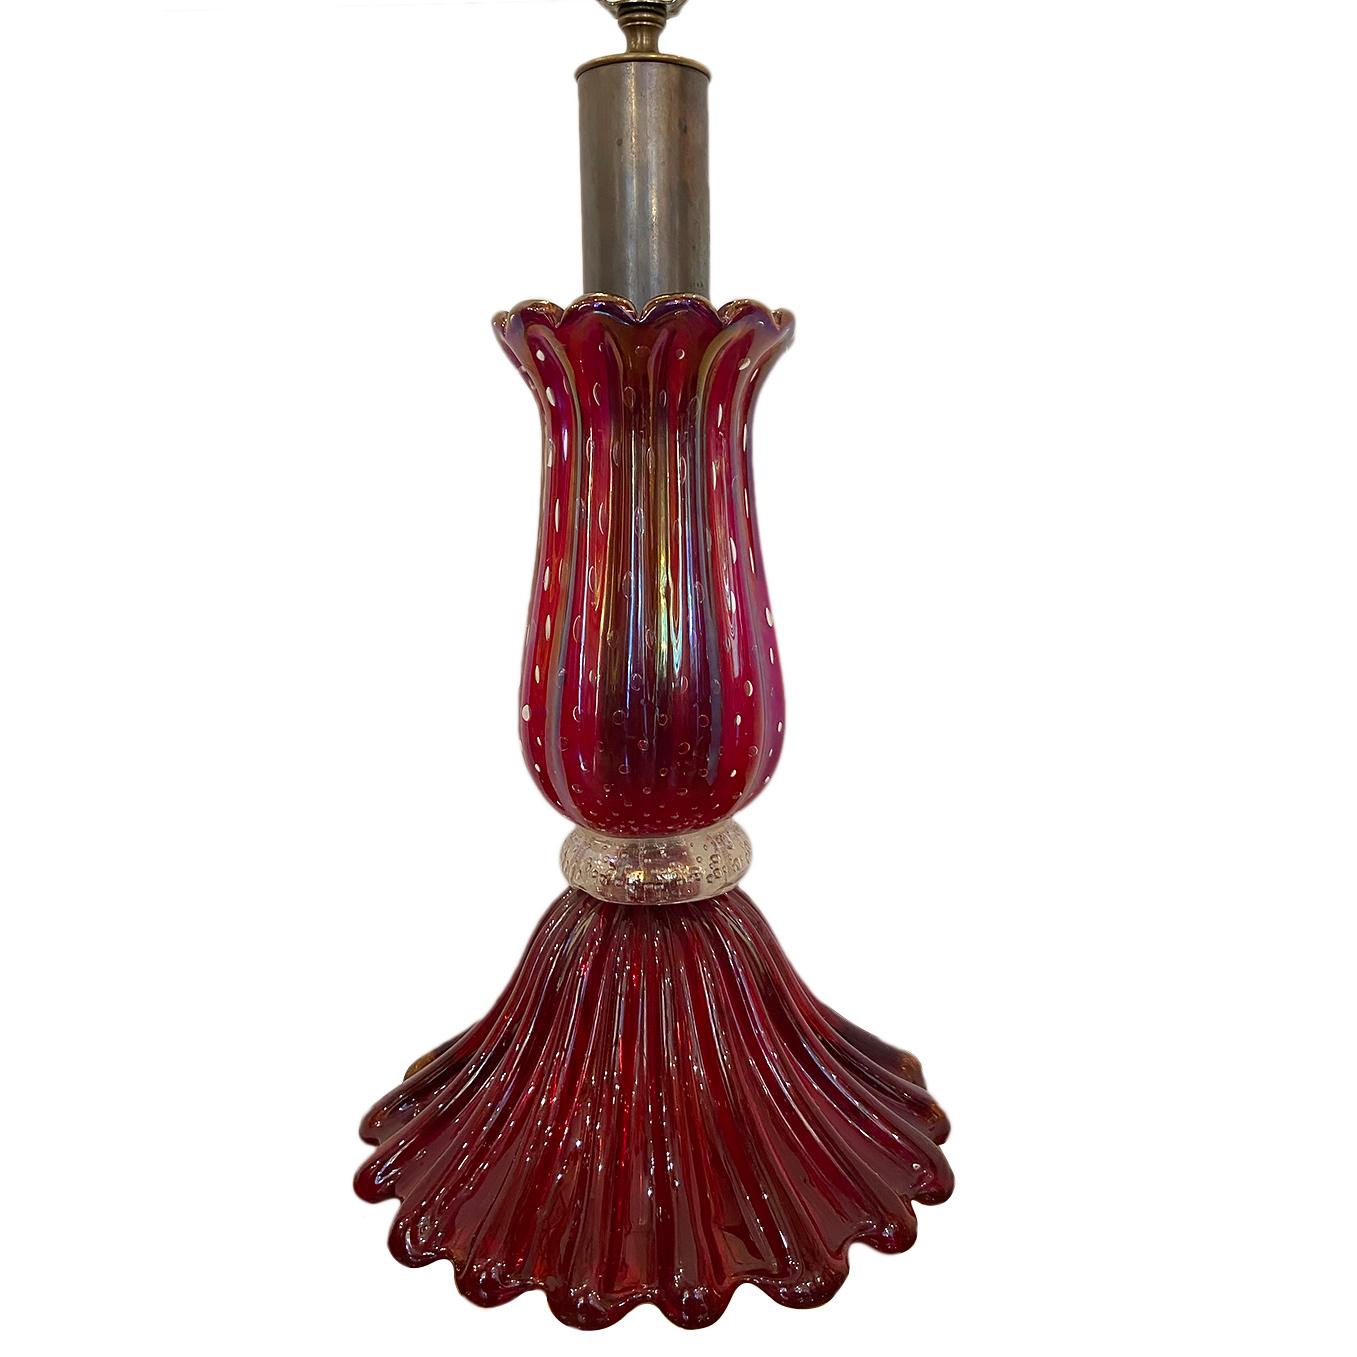 A circa 1940's single Venetian glass table lamp in red with gold waist.

Measurements:
Height of body 18